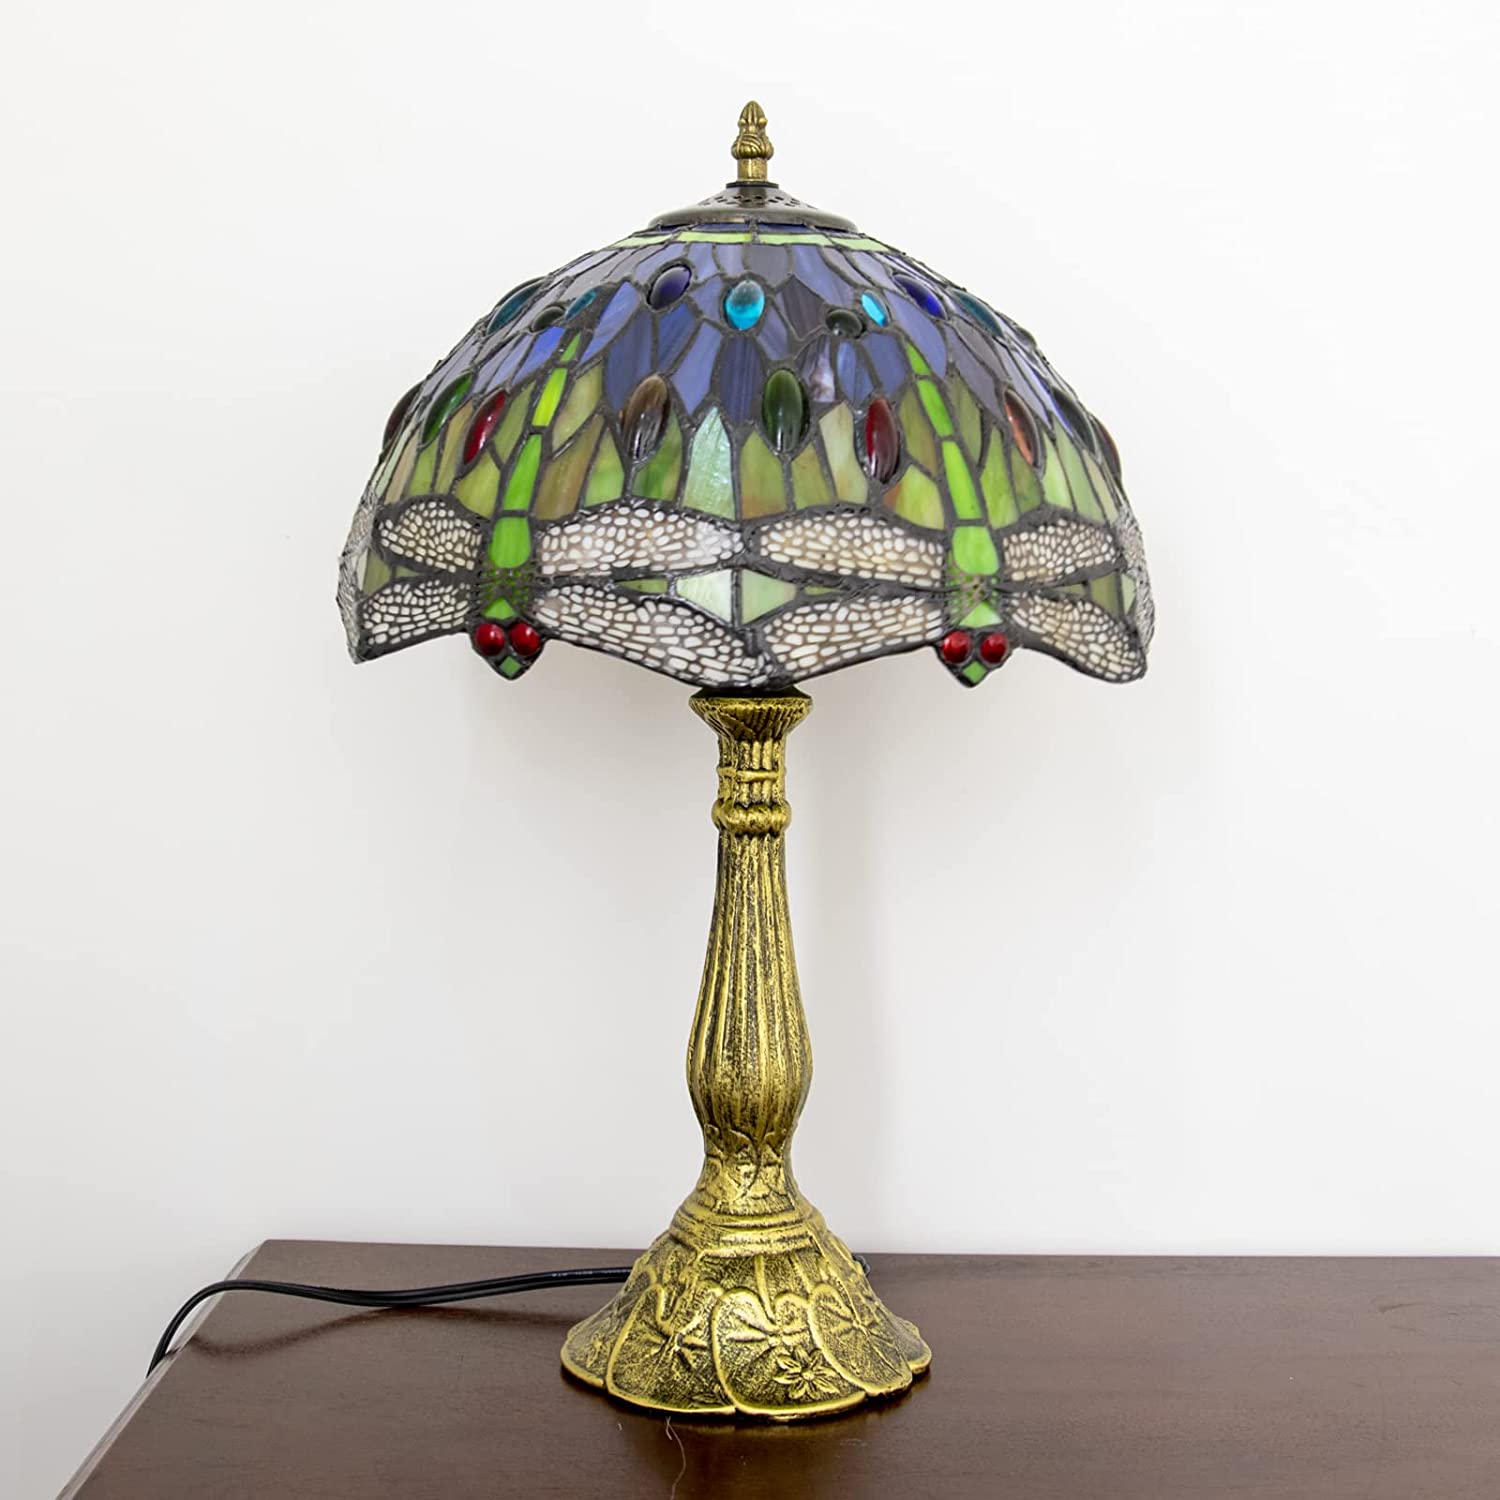 SHADY  Lamp Stained Glass Lamp Dragonfly Bedroom Table Lamp Reading Desk Light for Bedside Living Room Office Dormitory Dining Room Decorate Housewarming  12x12x18 Include Light Bu